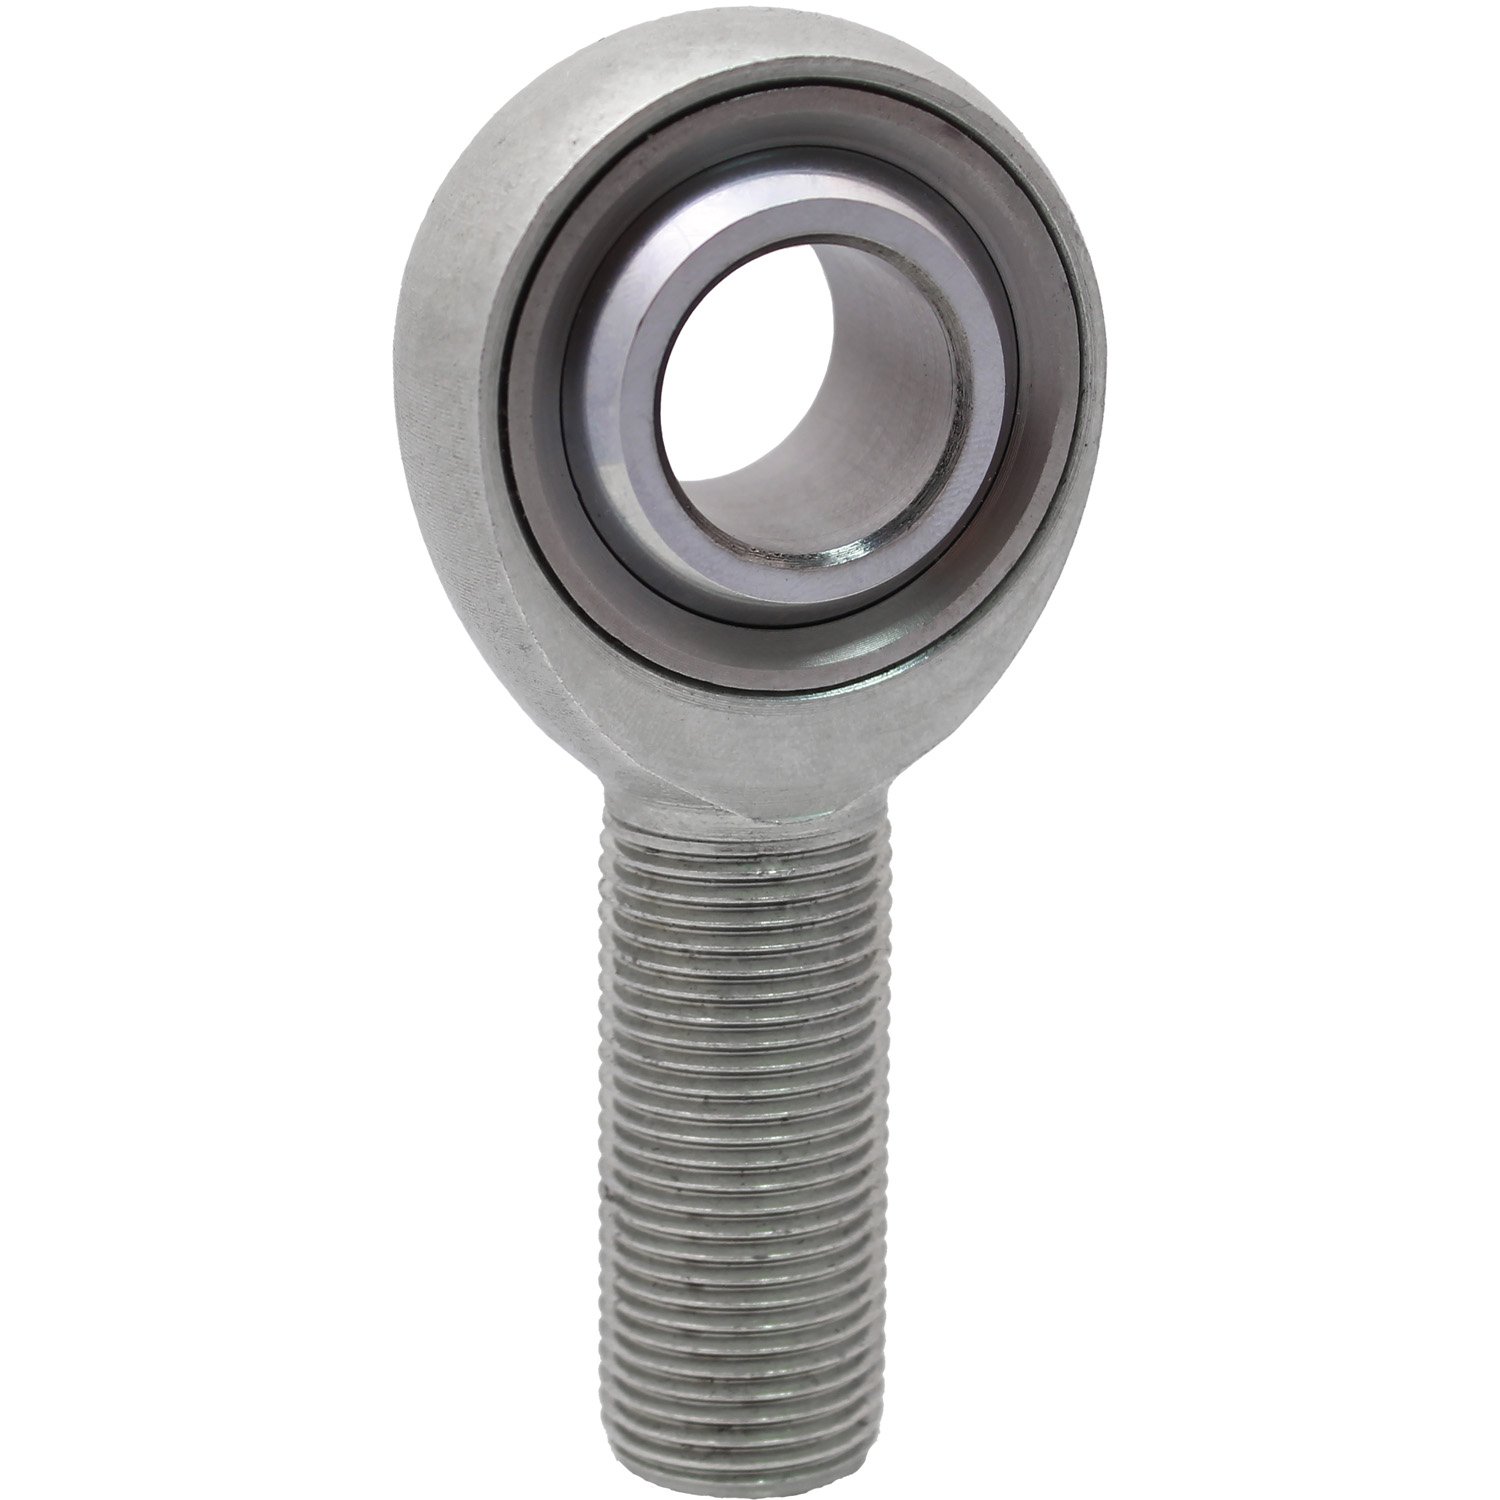 HM Series Rod End Hole I.D.: 1.000 in.